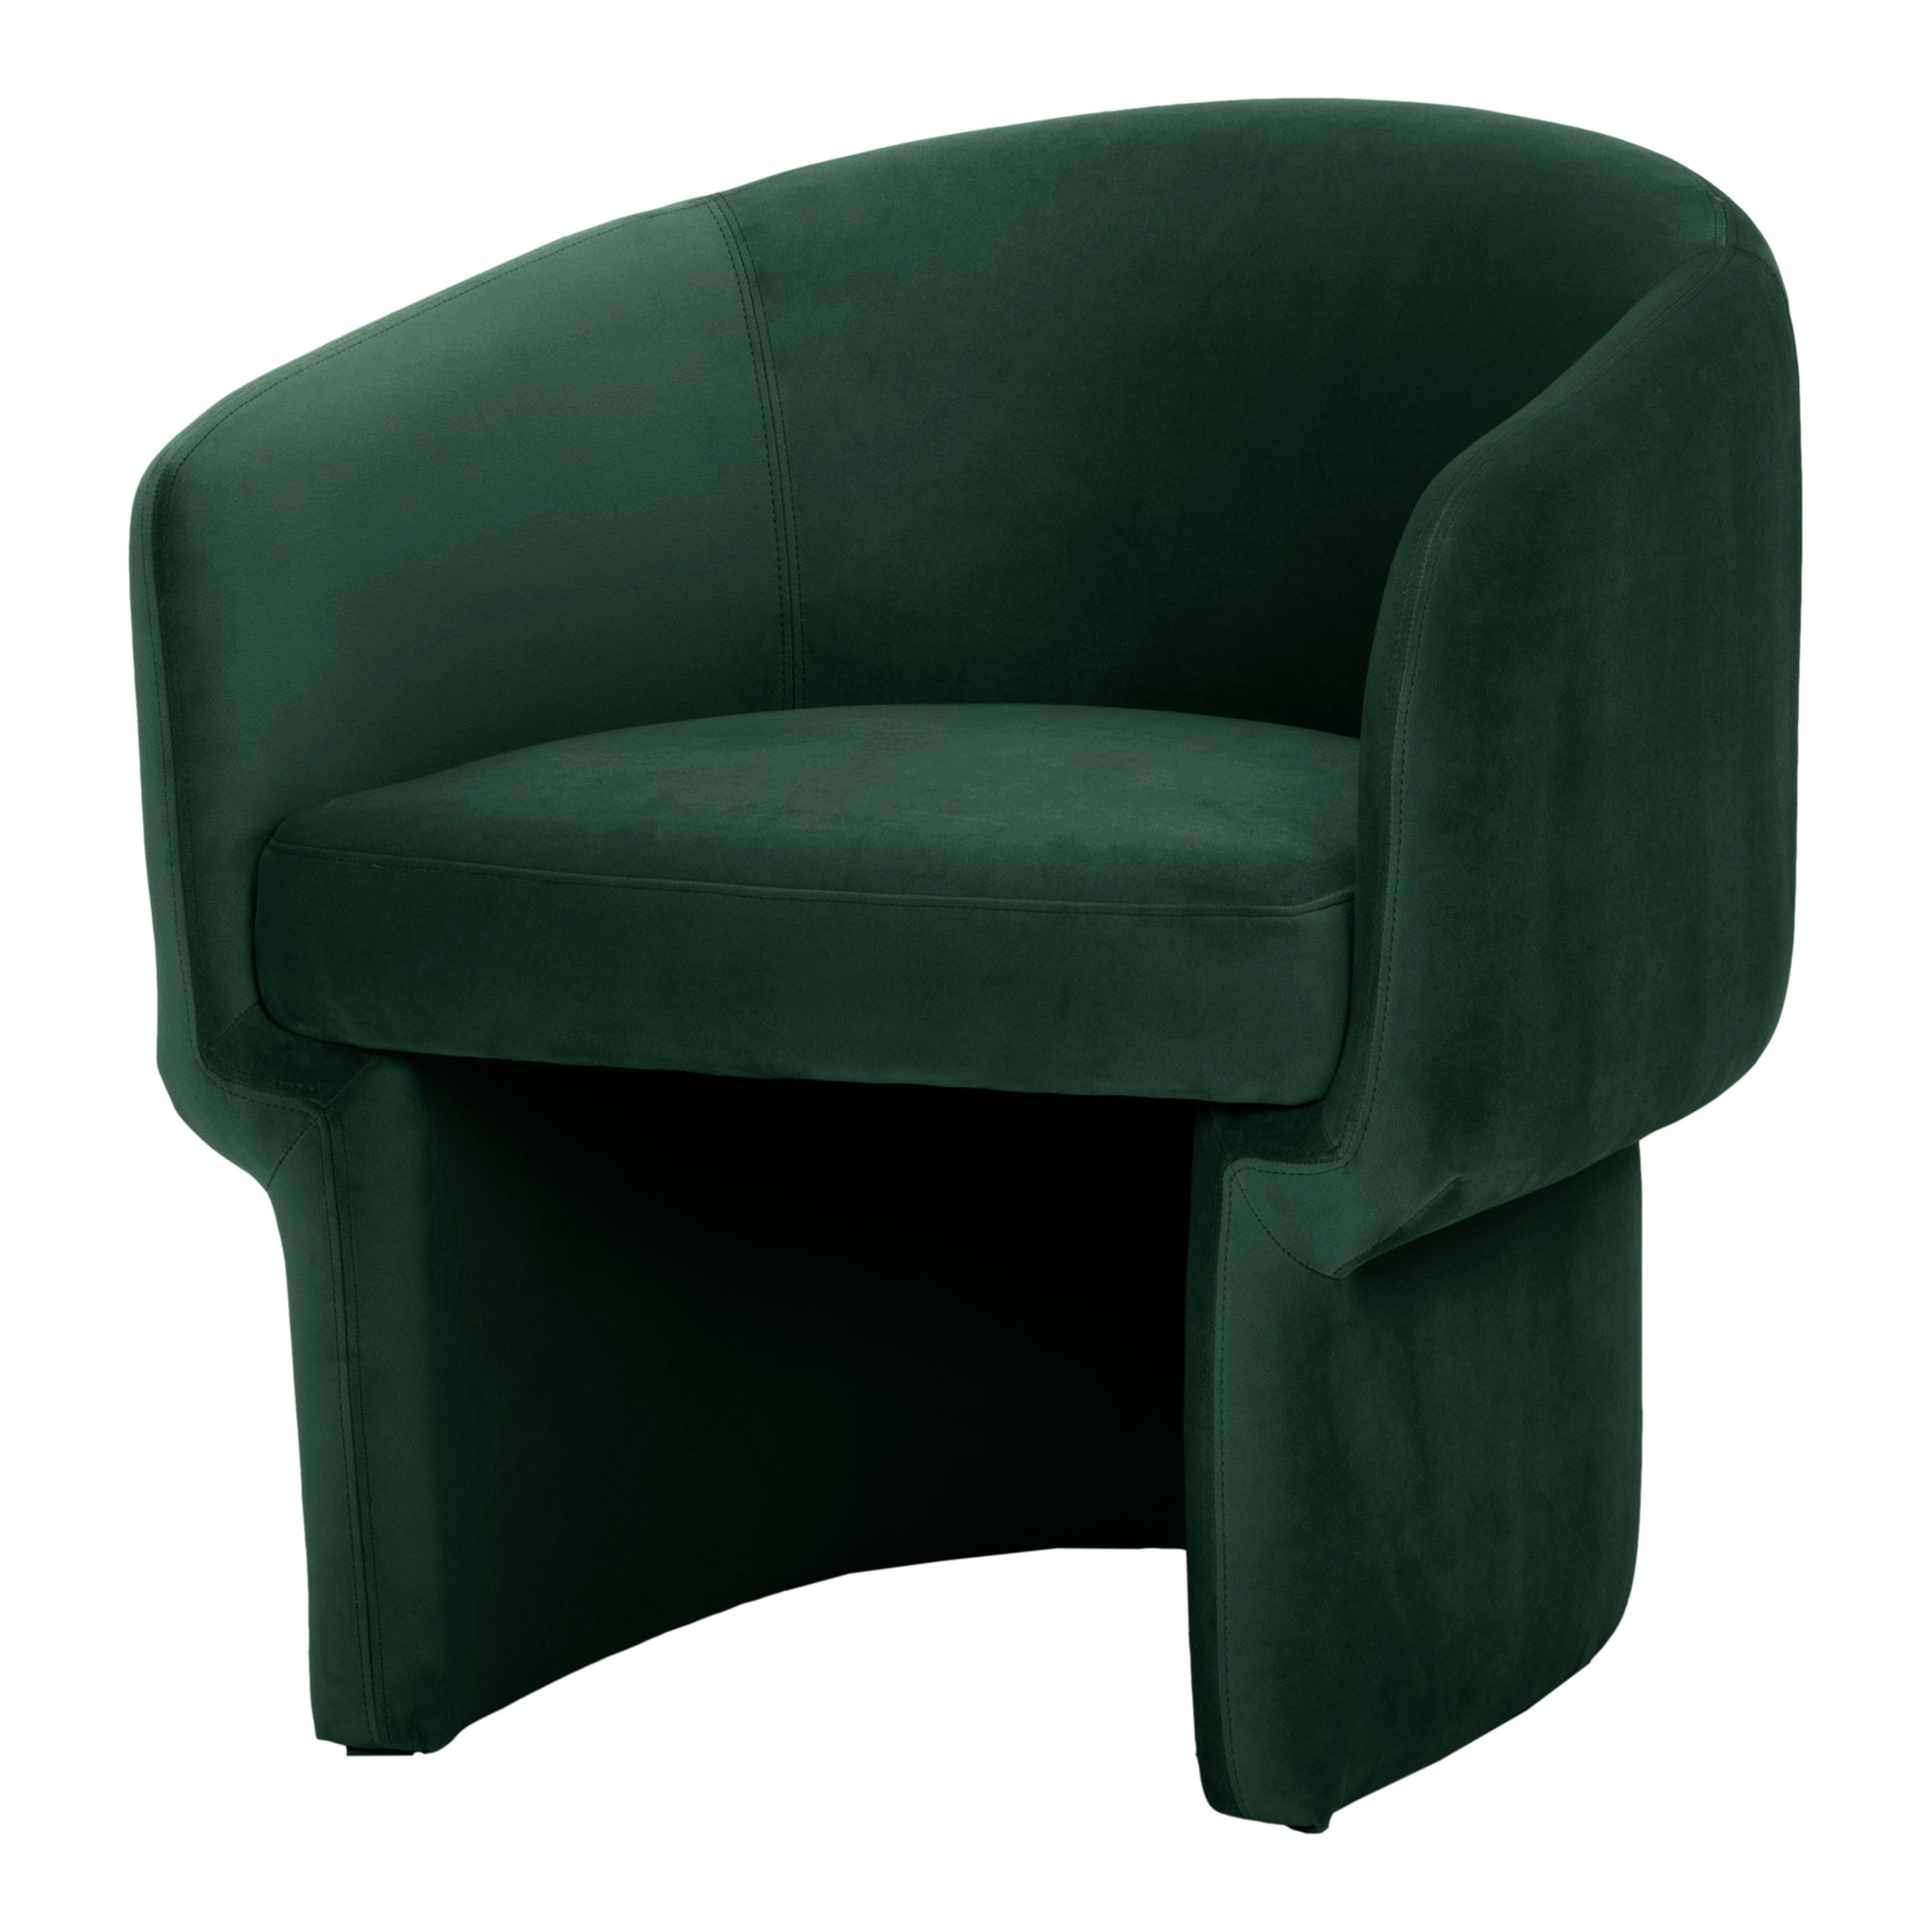 Buy Moe's Home Collection Franco Chair Dark Green JM-1005-27 ...